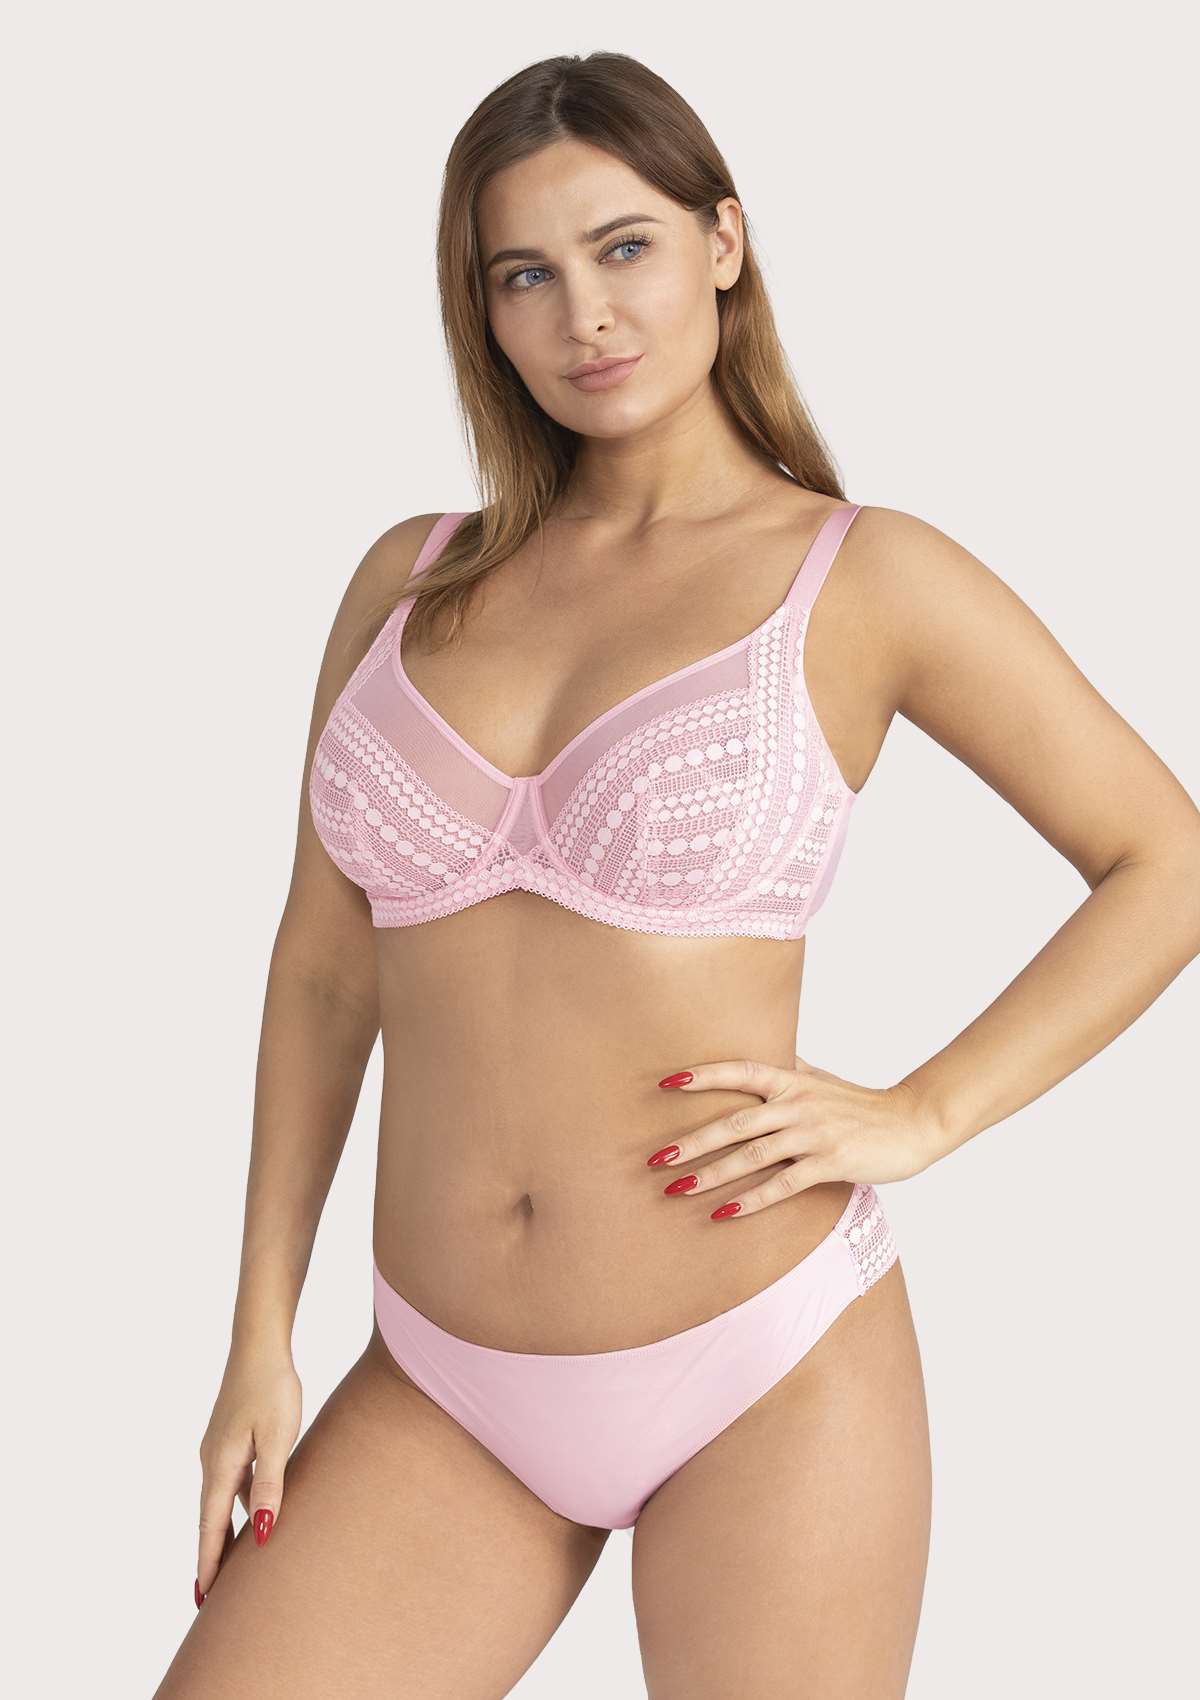 HSIA Heroine Lace Bra And Panties Set: Most Comfortable Supportive Bra - Pink / 44 / D